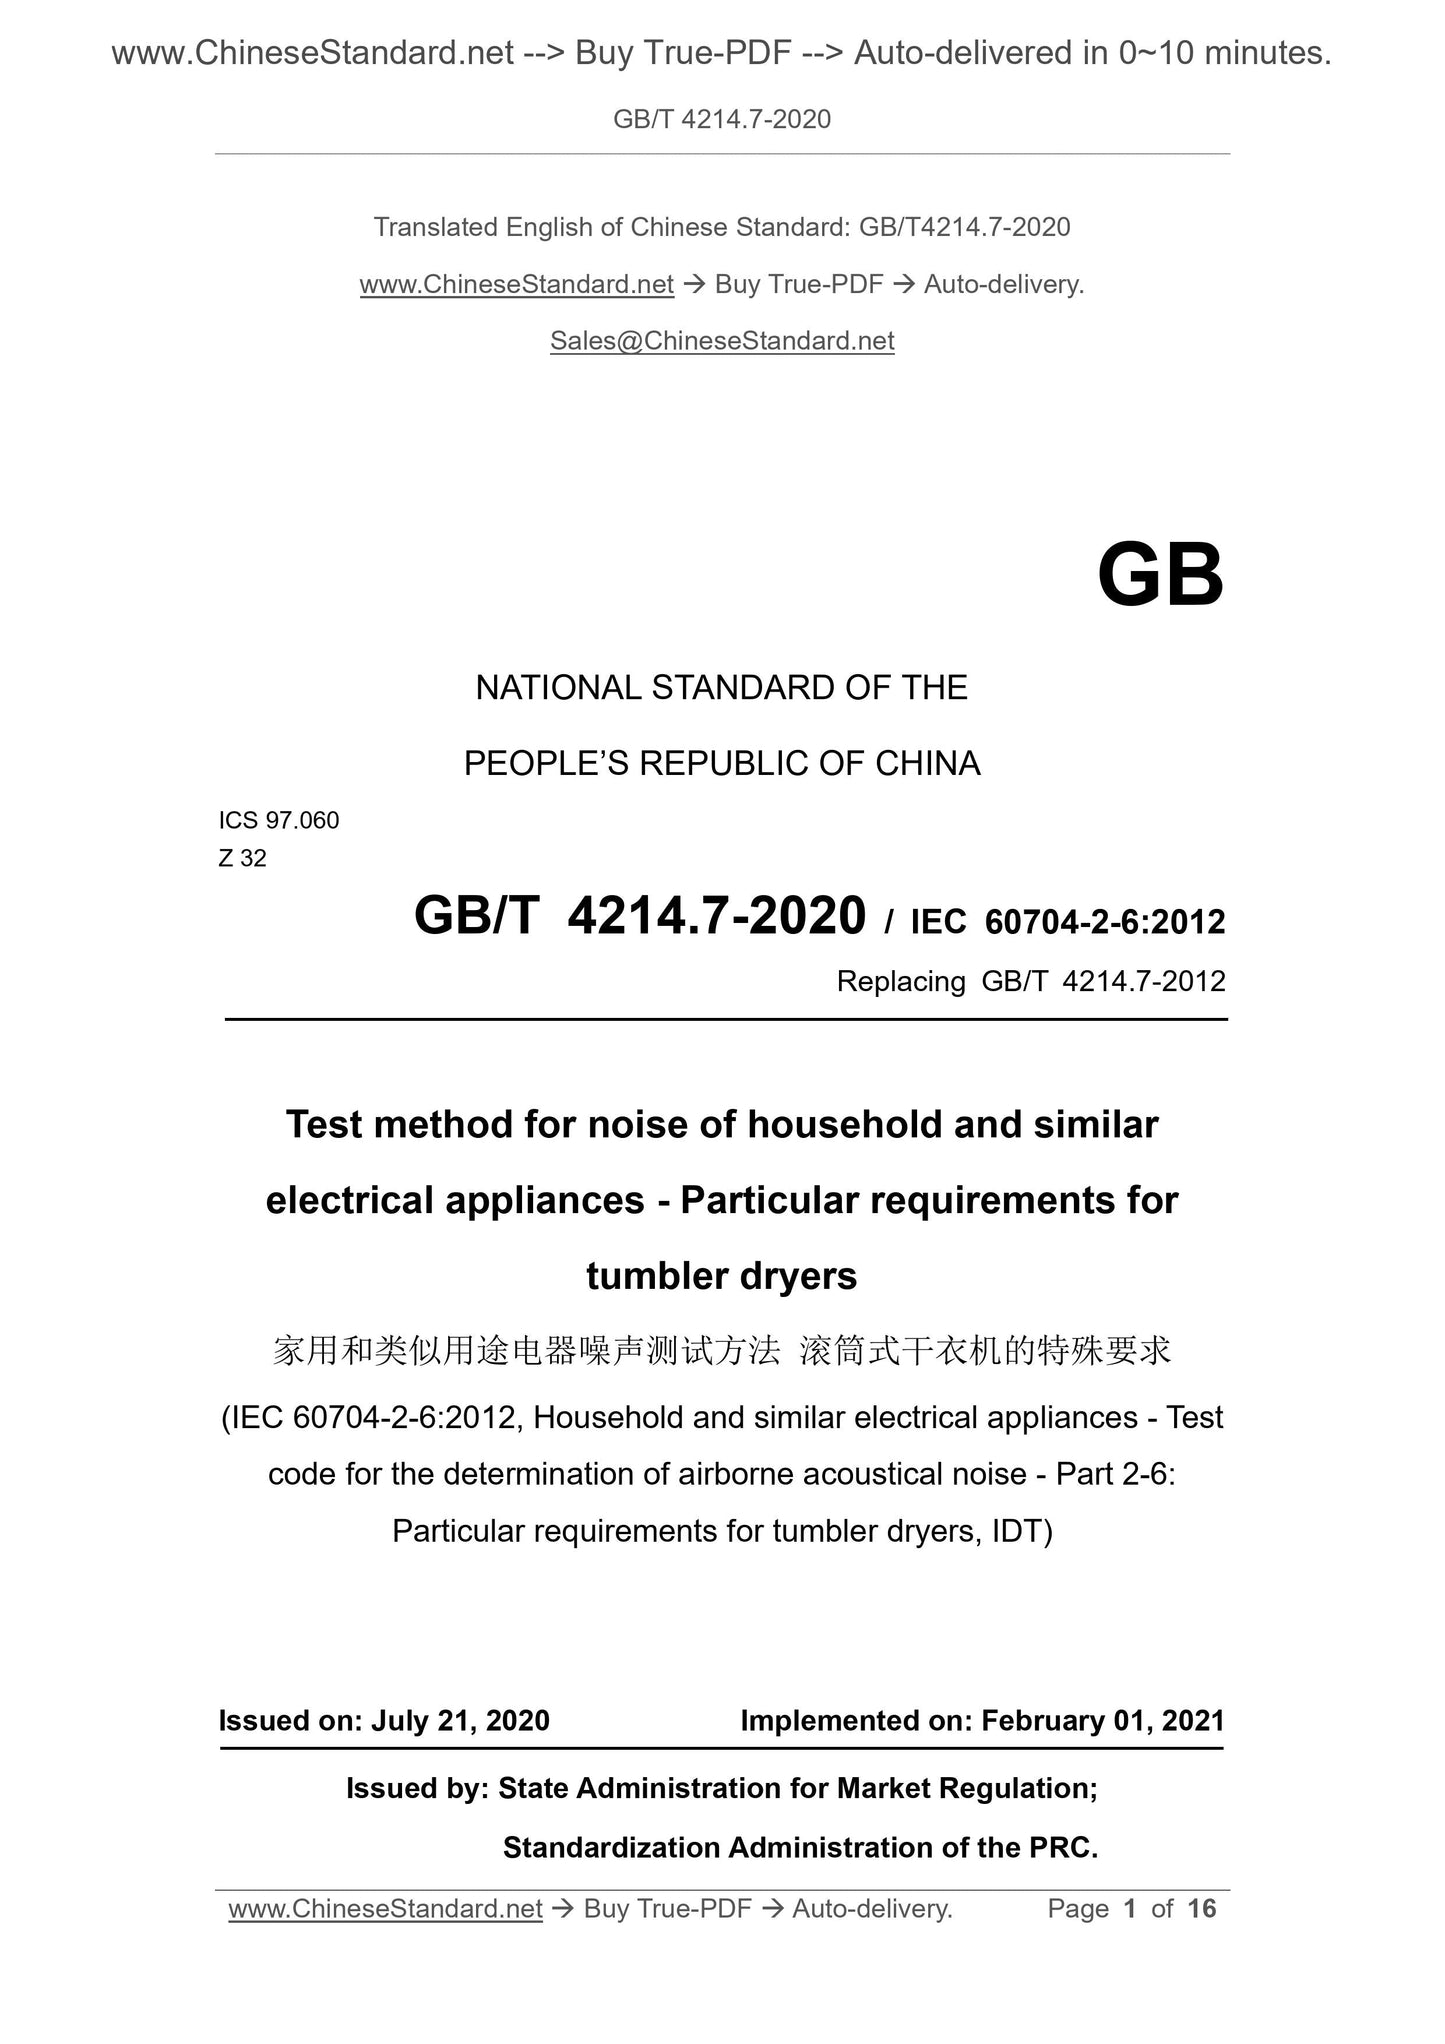 GB/T 4214.7-2020 Page 1